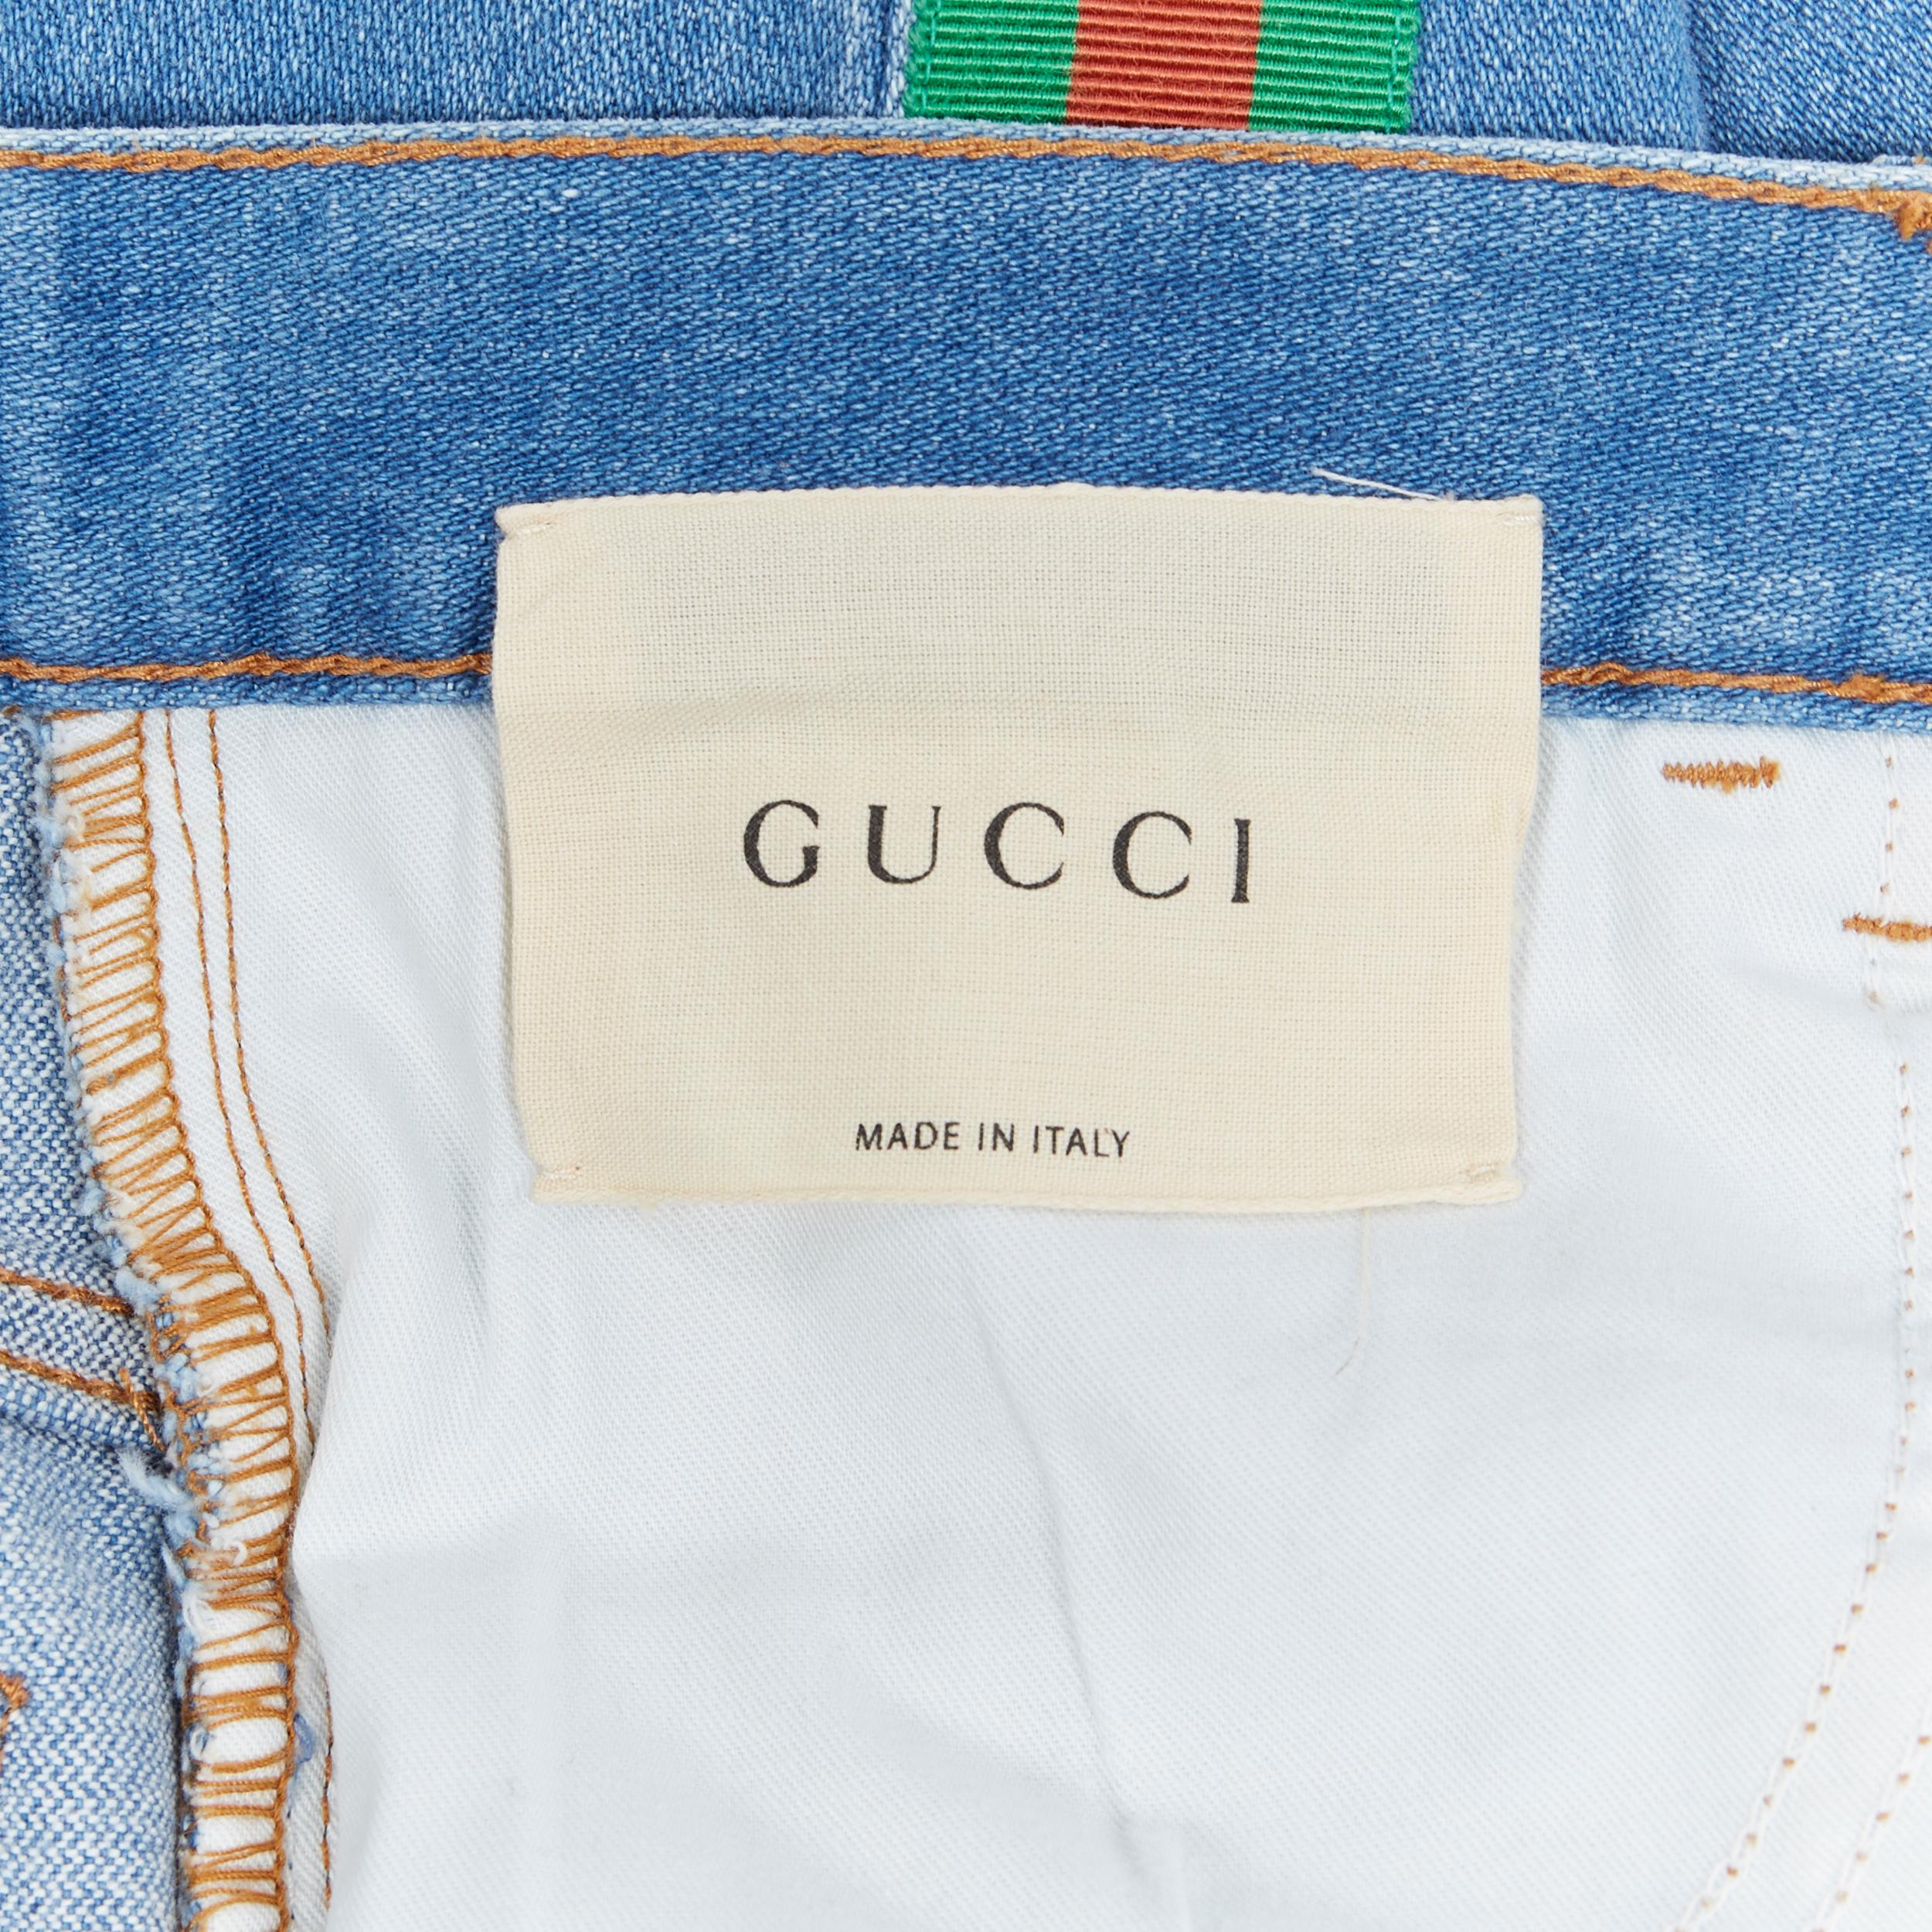 GUCCI ALESSANDRO MICHELE  blue denim red green web trim 90's flared jeans 24